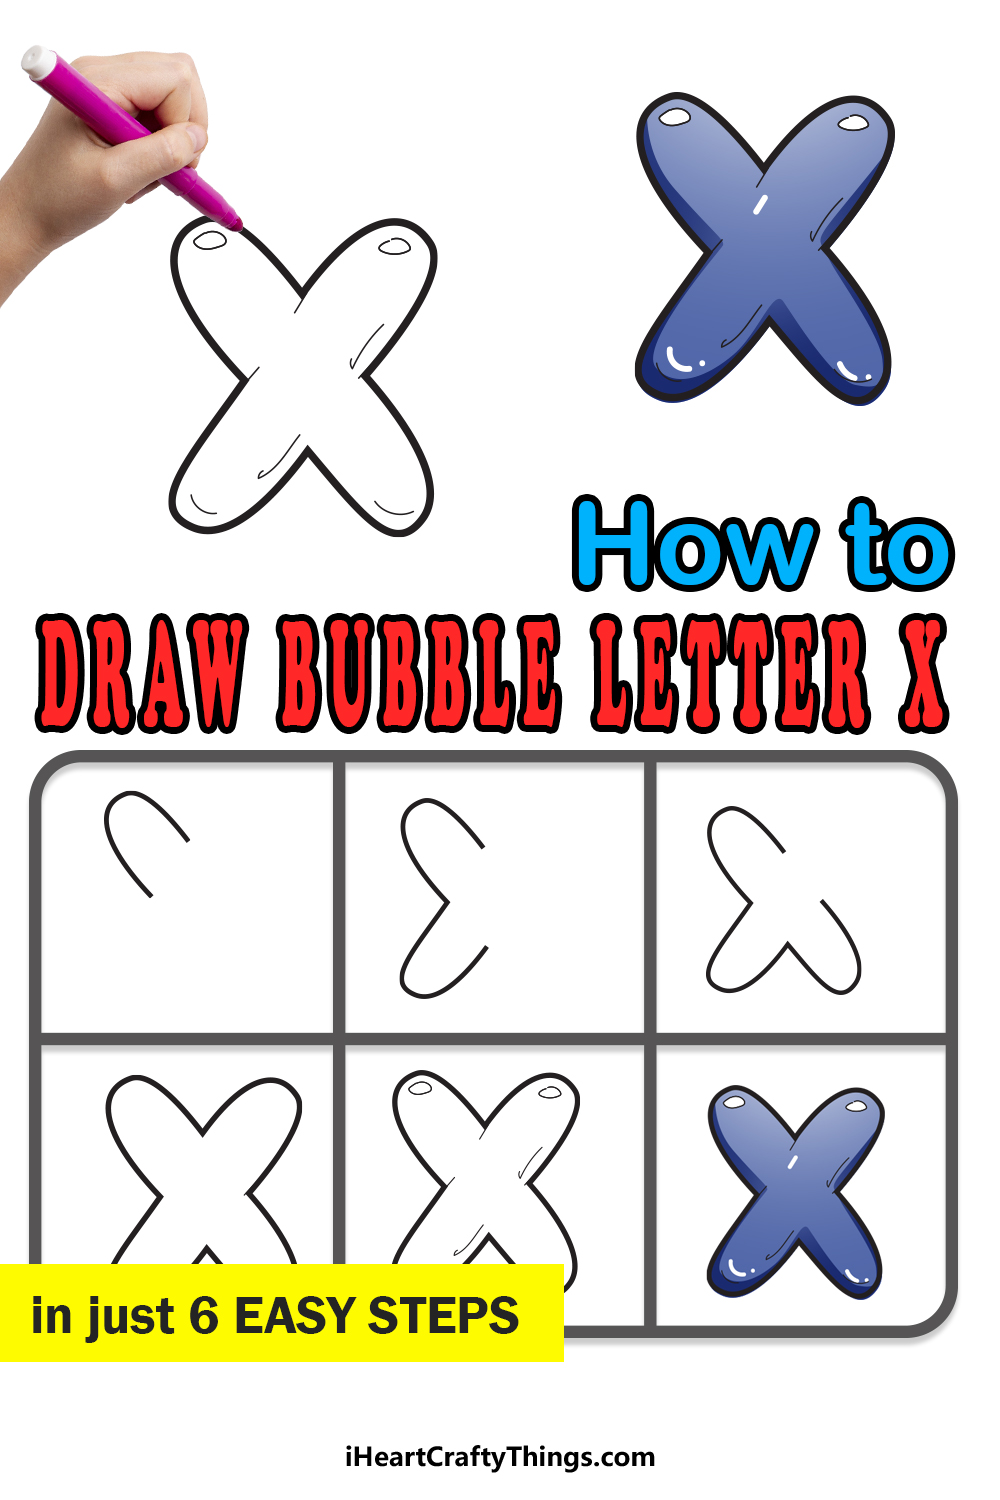 How To Draw Your Own Bubble X step by step guide